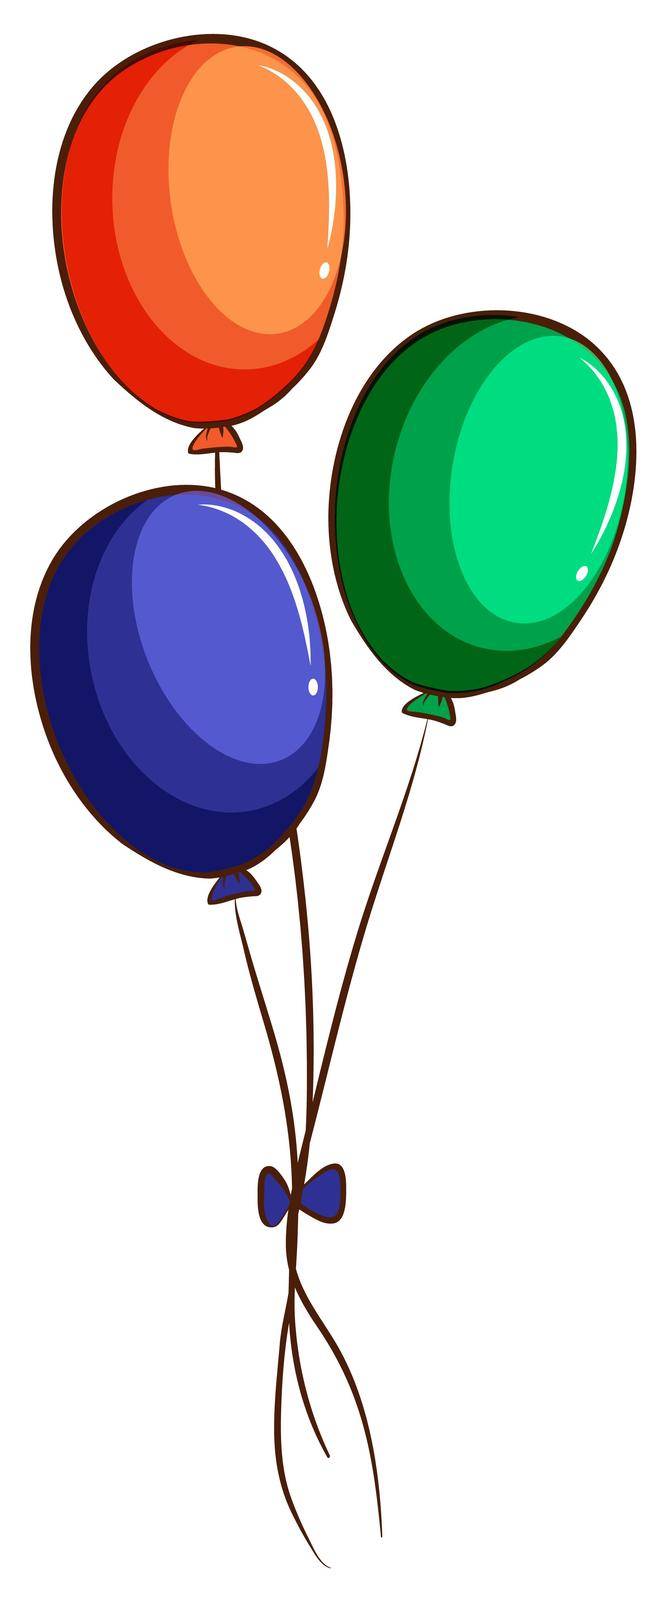 Illustration of a drawing of three colourful balloons on a white background